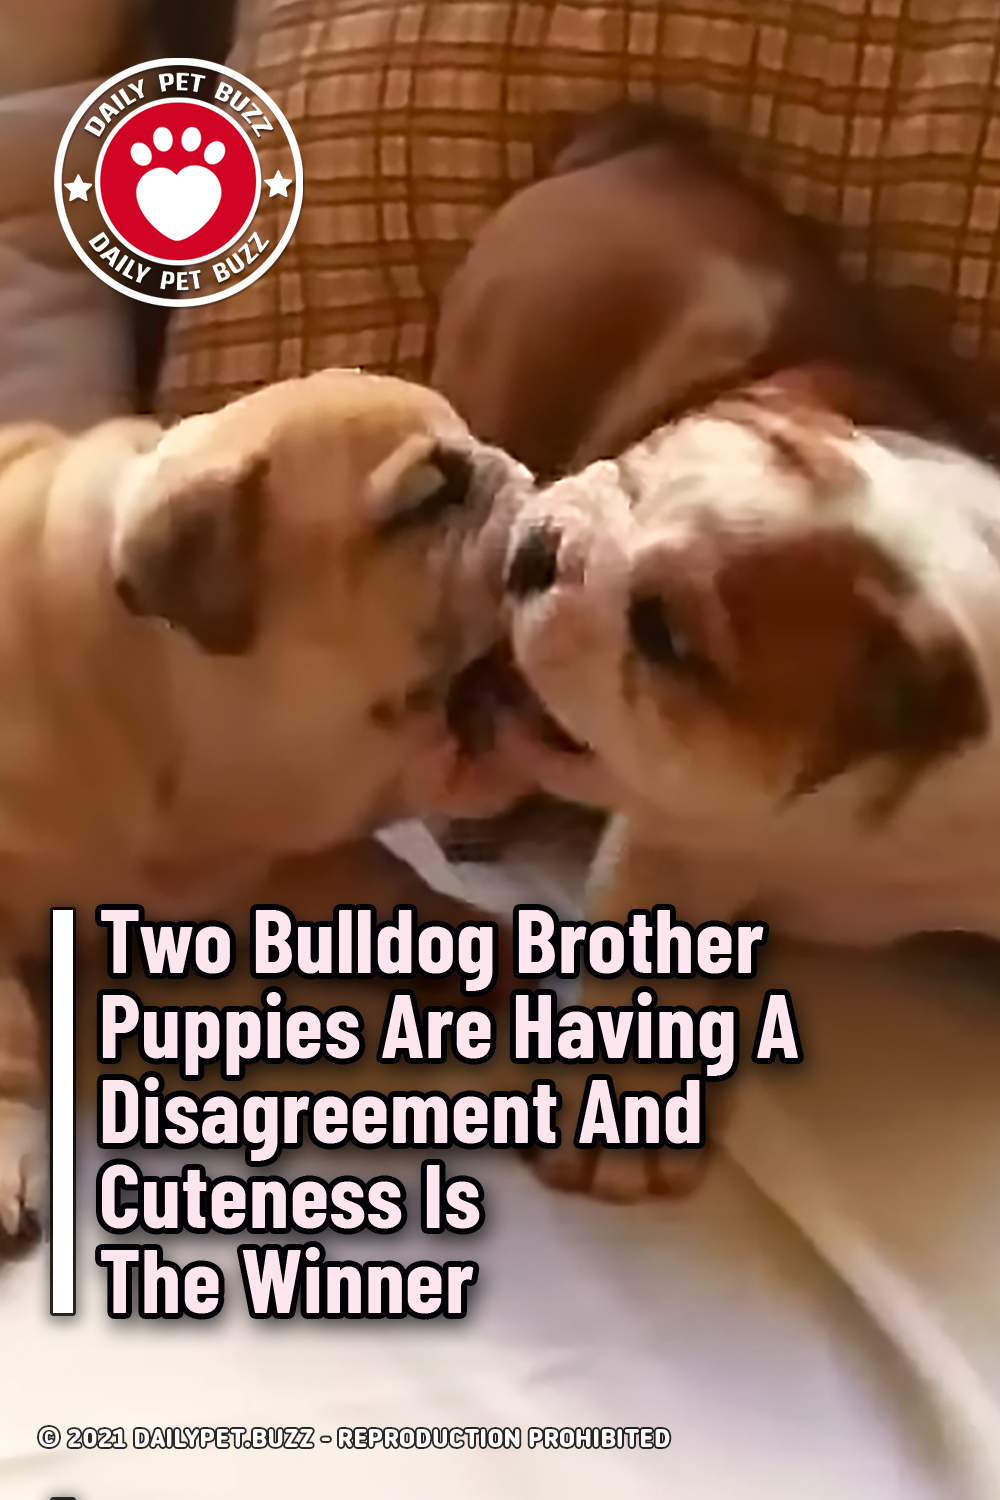 Two Bulldog Brother Puppies Are Having A Disagreement And Cuteness Is The Winner